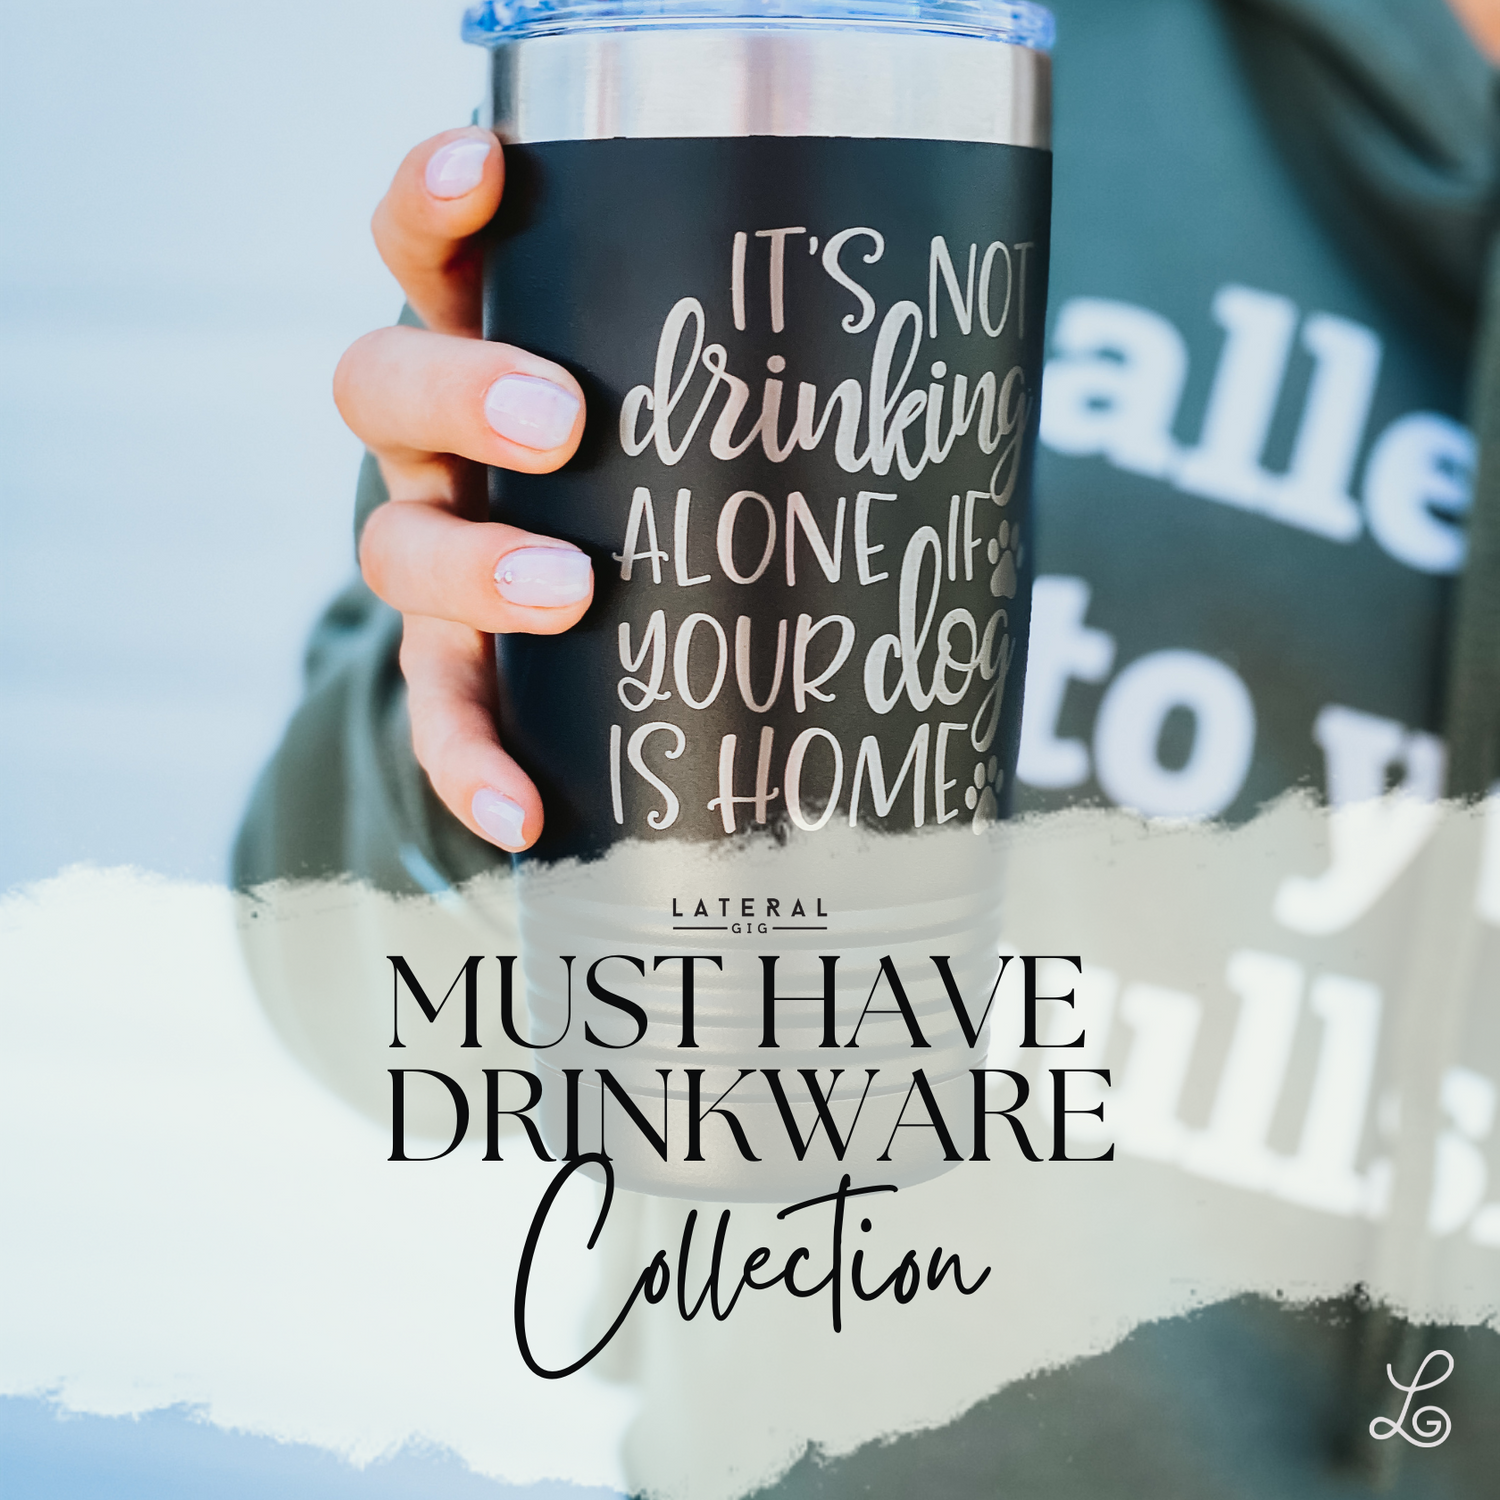 DRINKWARE COLLECTION